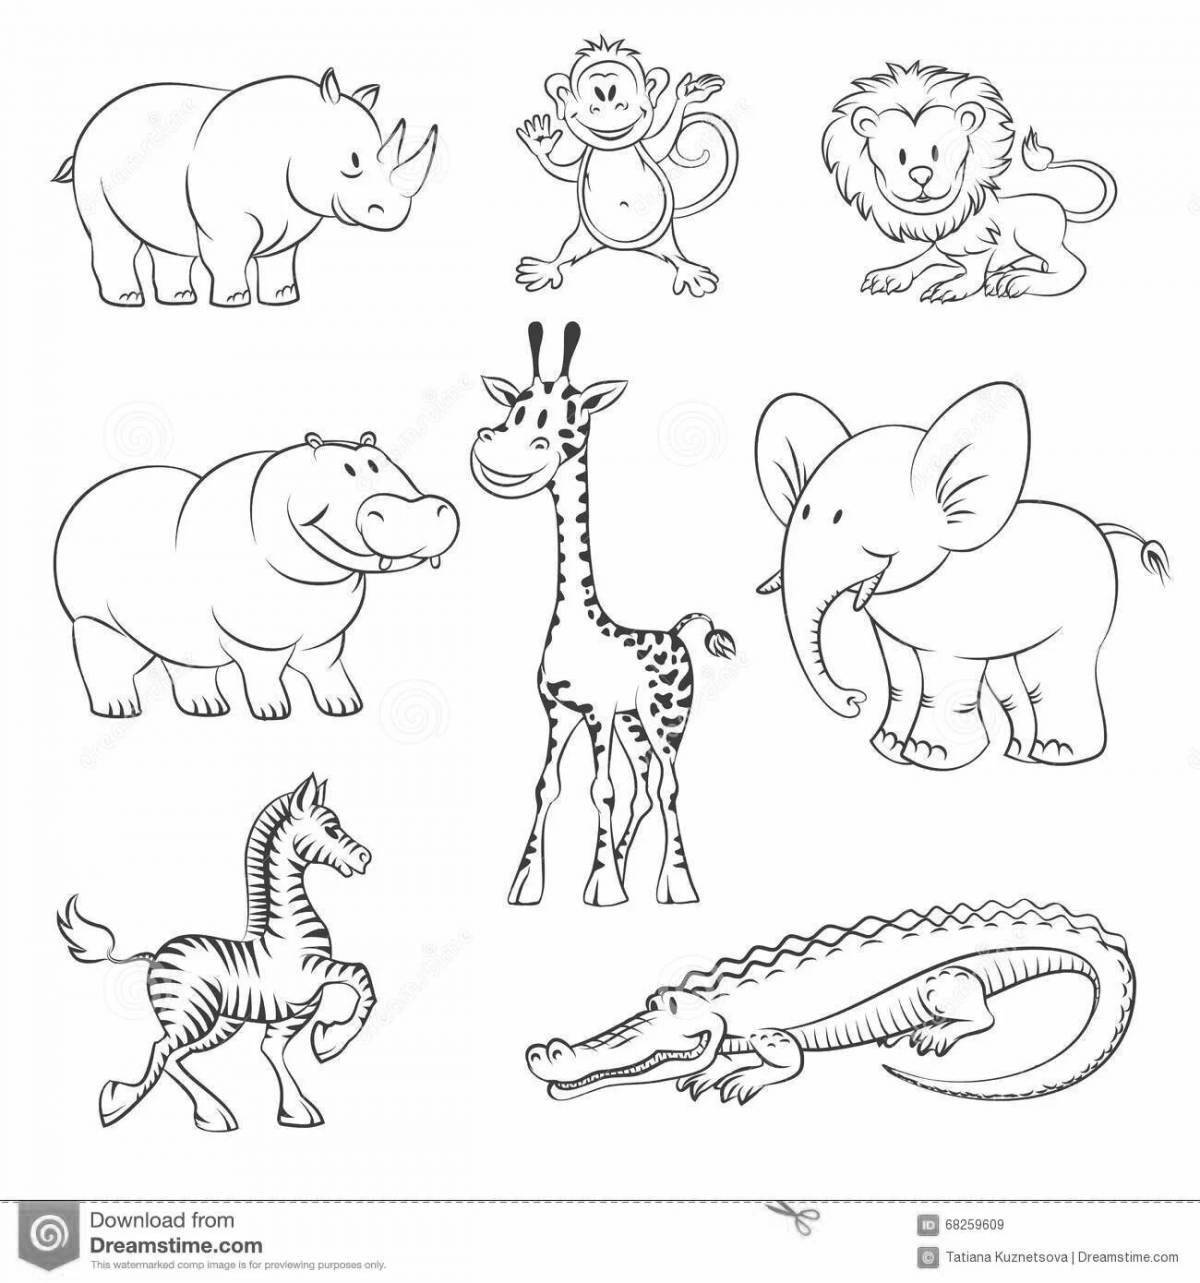 Amazing African animal coloring book for 5-7 year olds